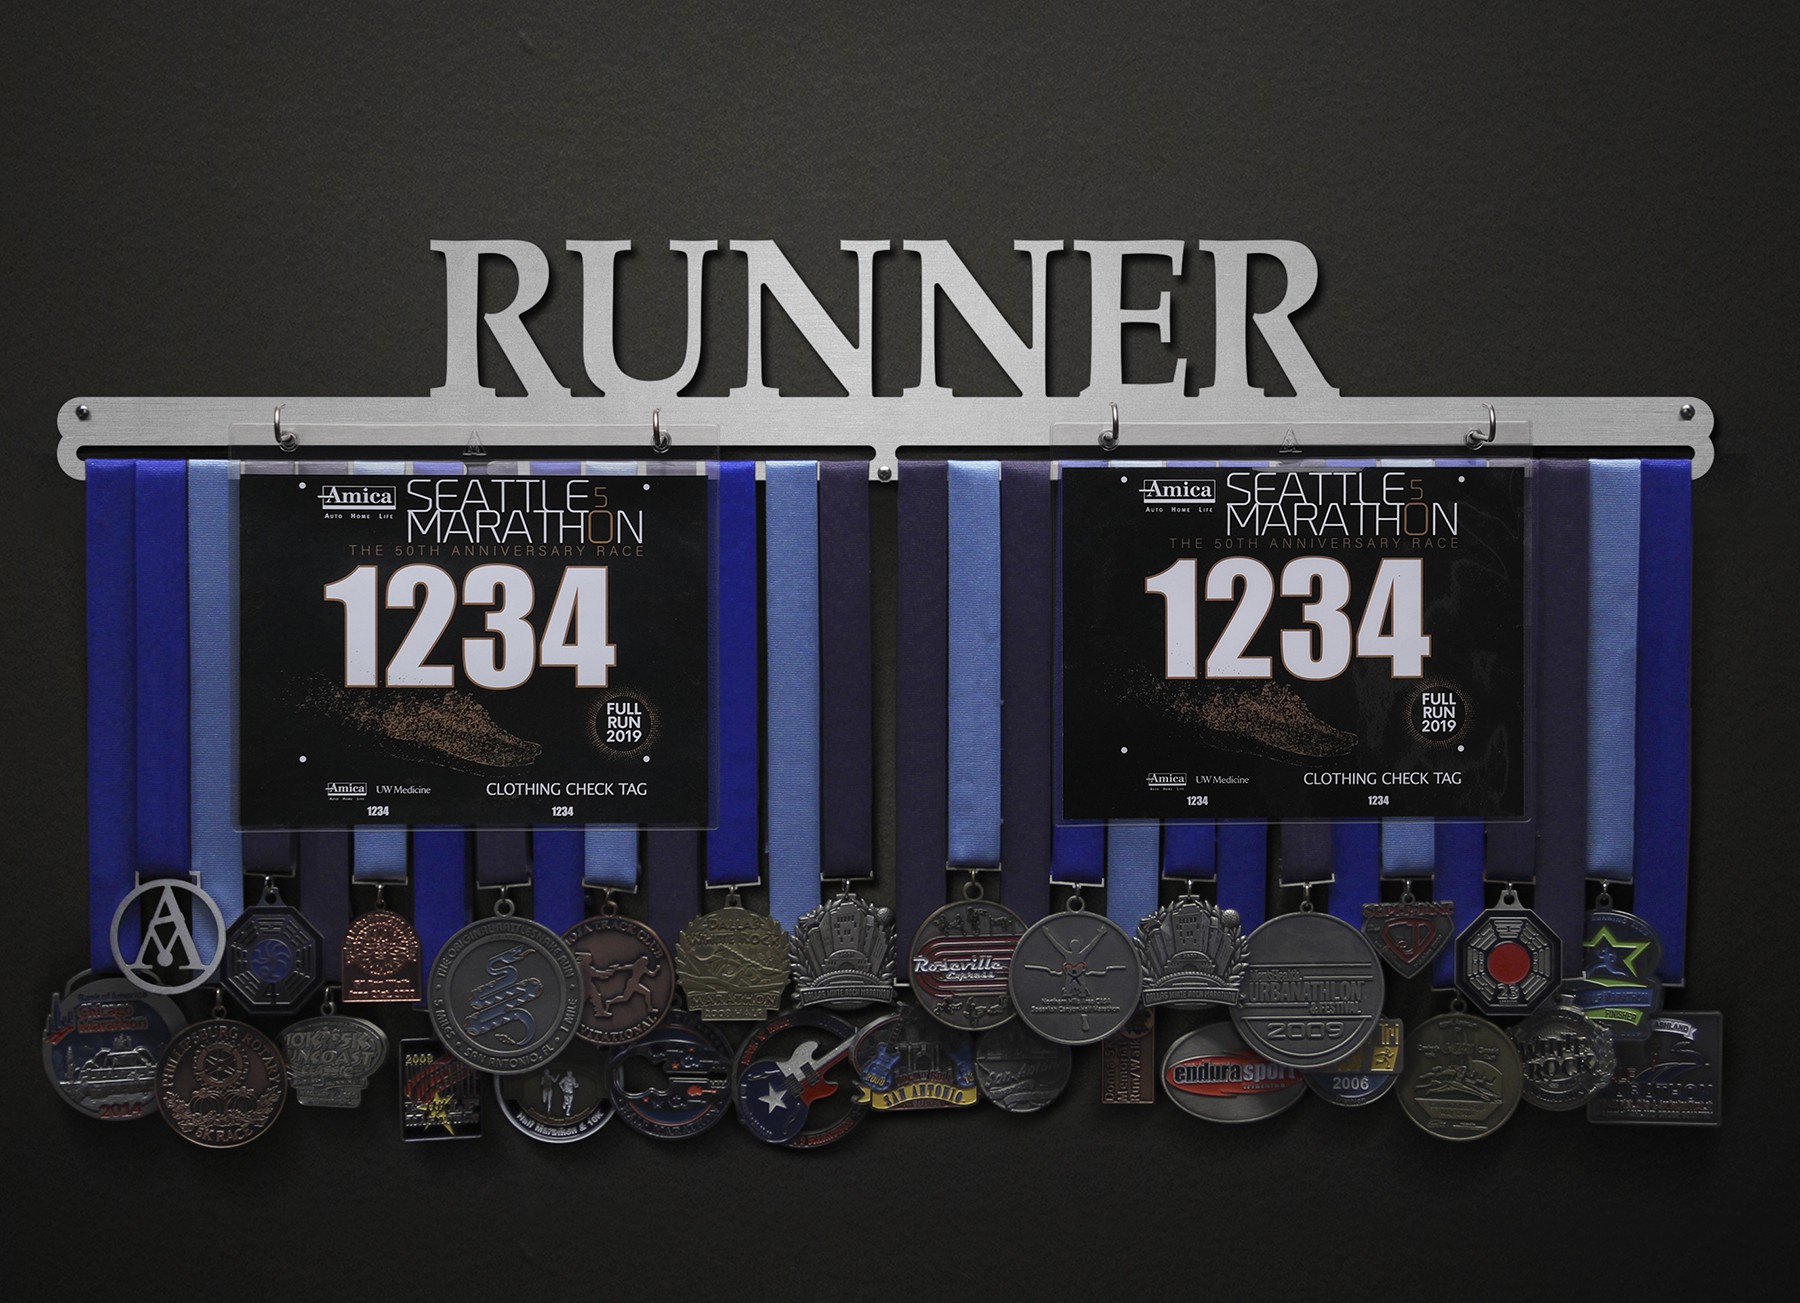 Runner Bib and Medal Display - Text Only